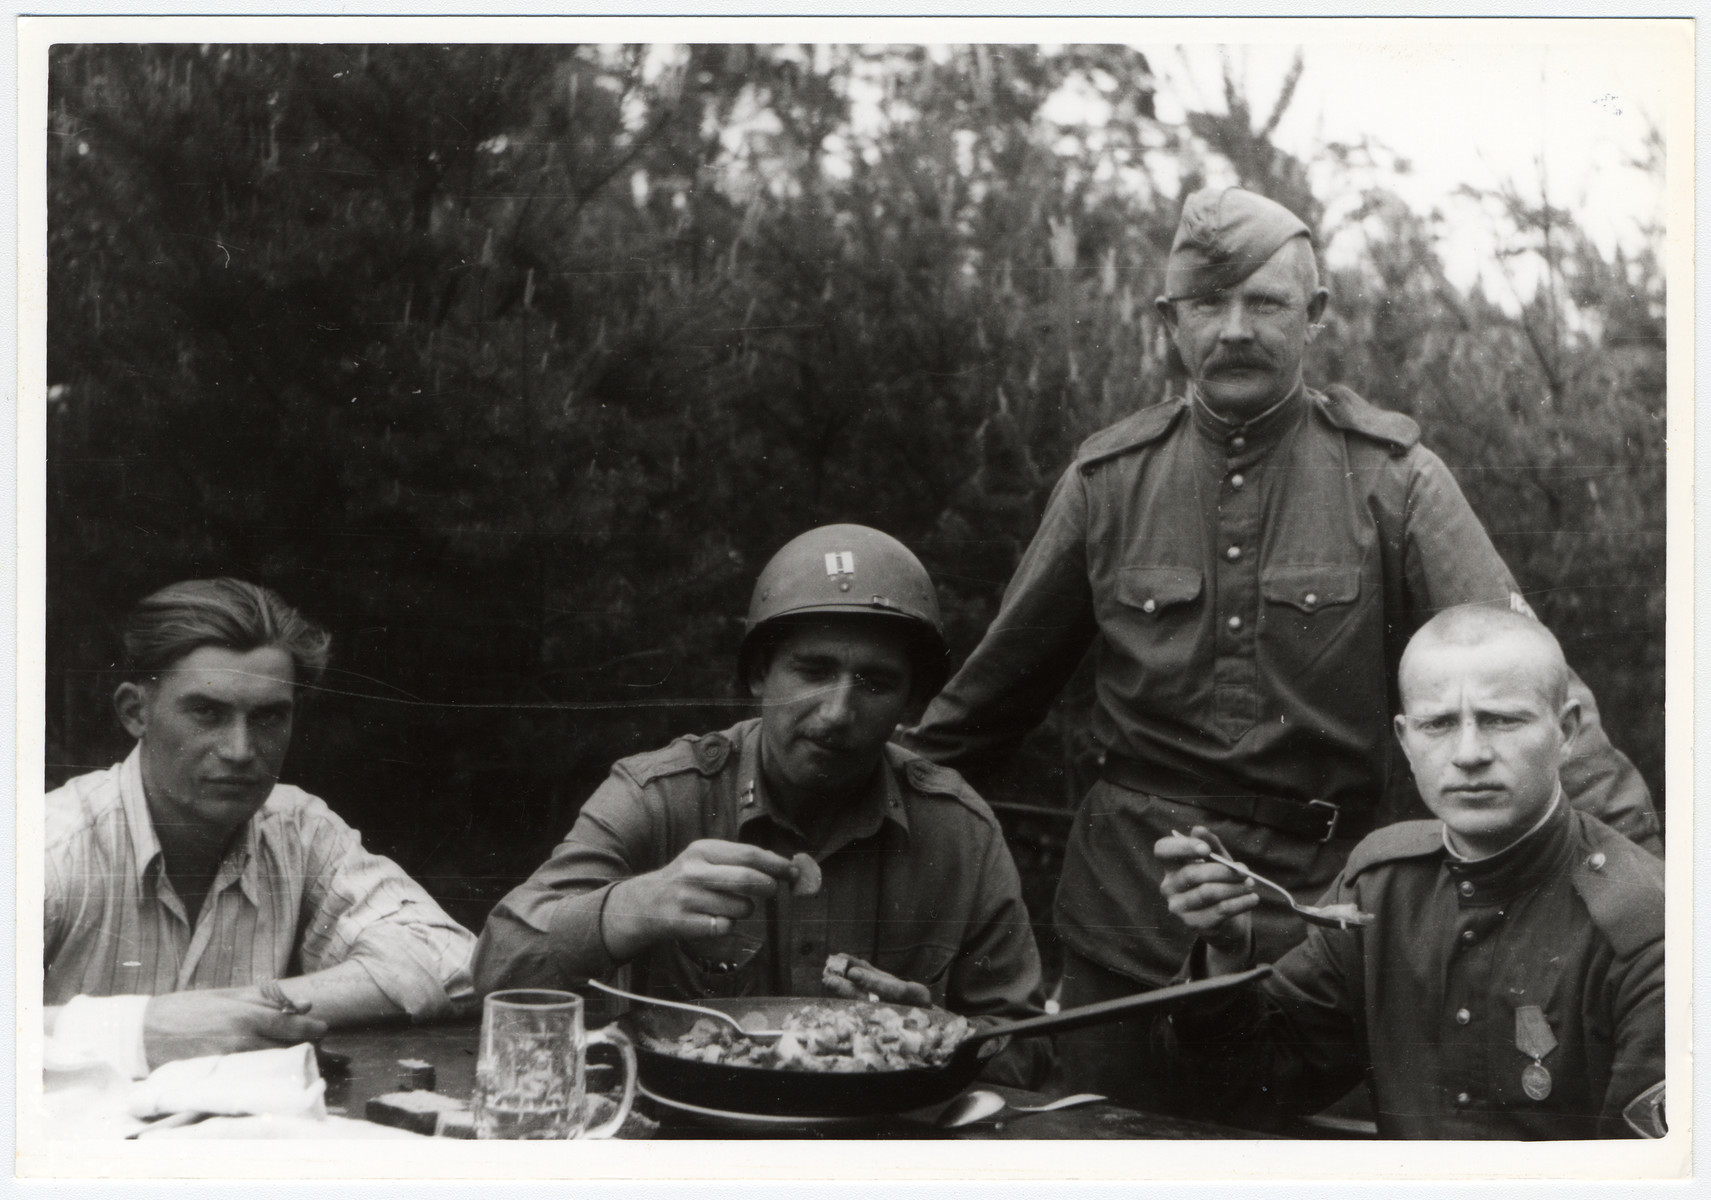 American and Russian soldiers share a meal.

Among those pictured is the donor, Louis Drucker.